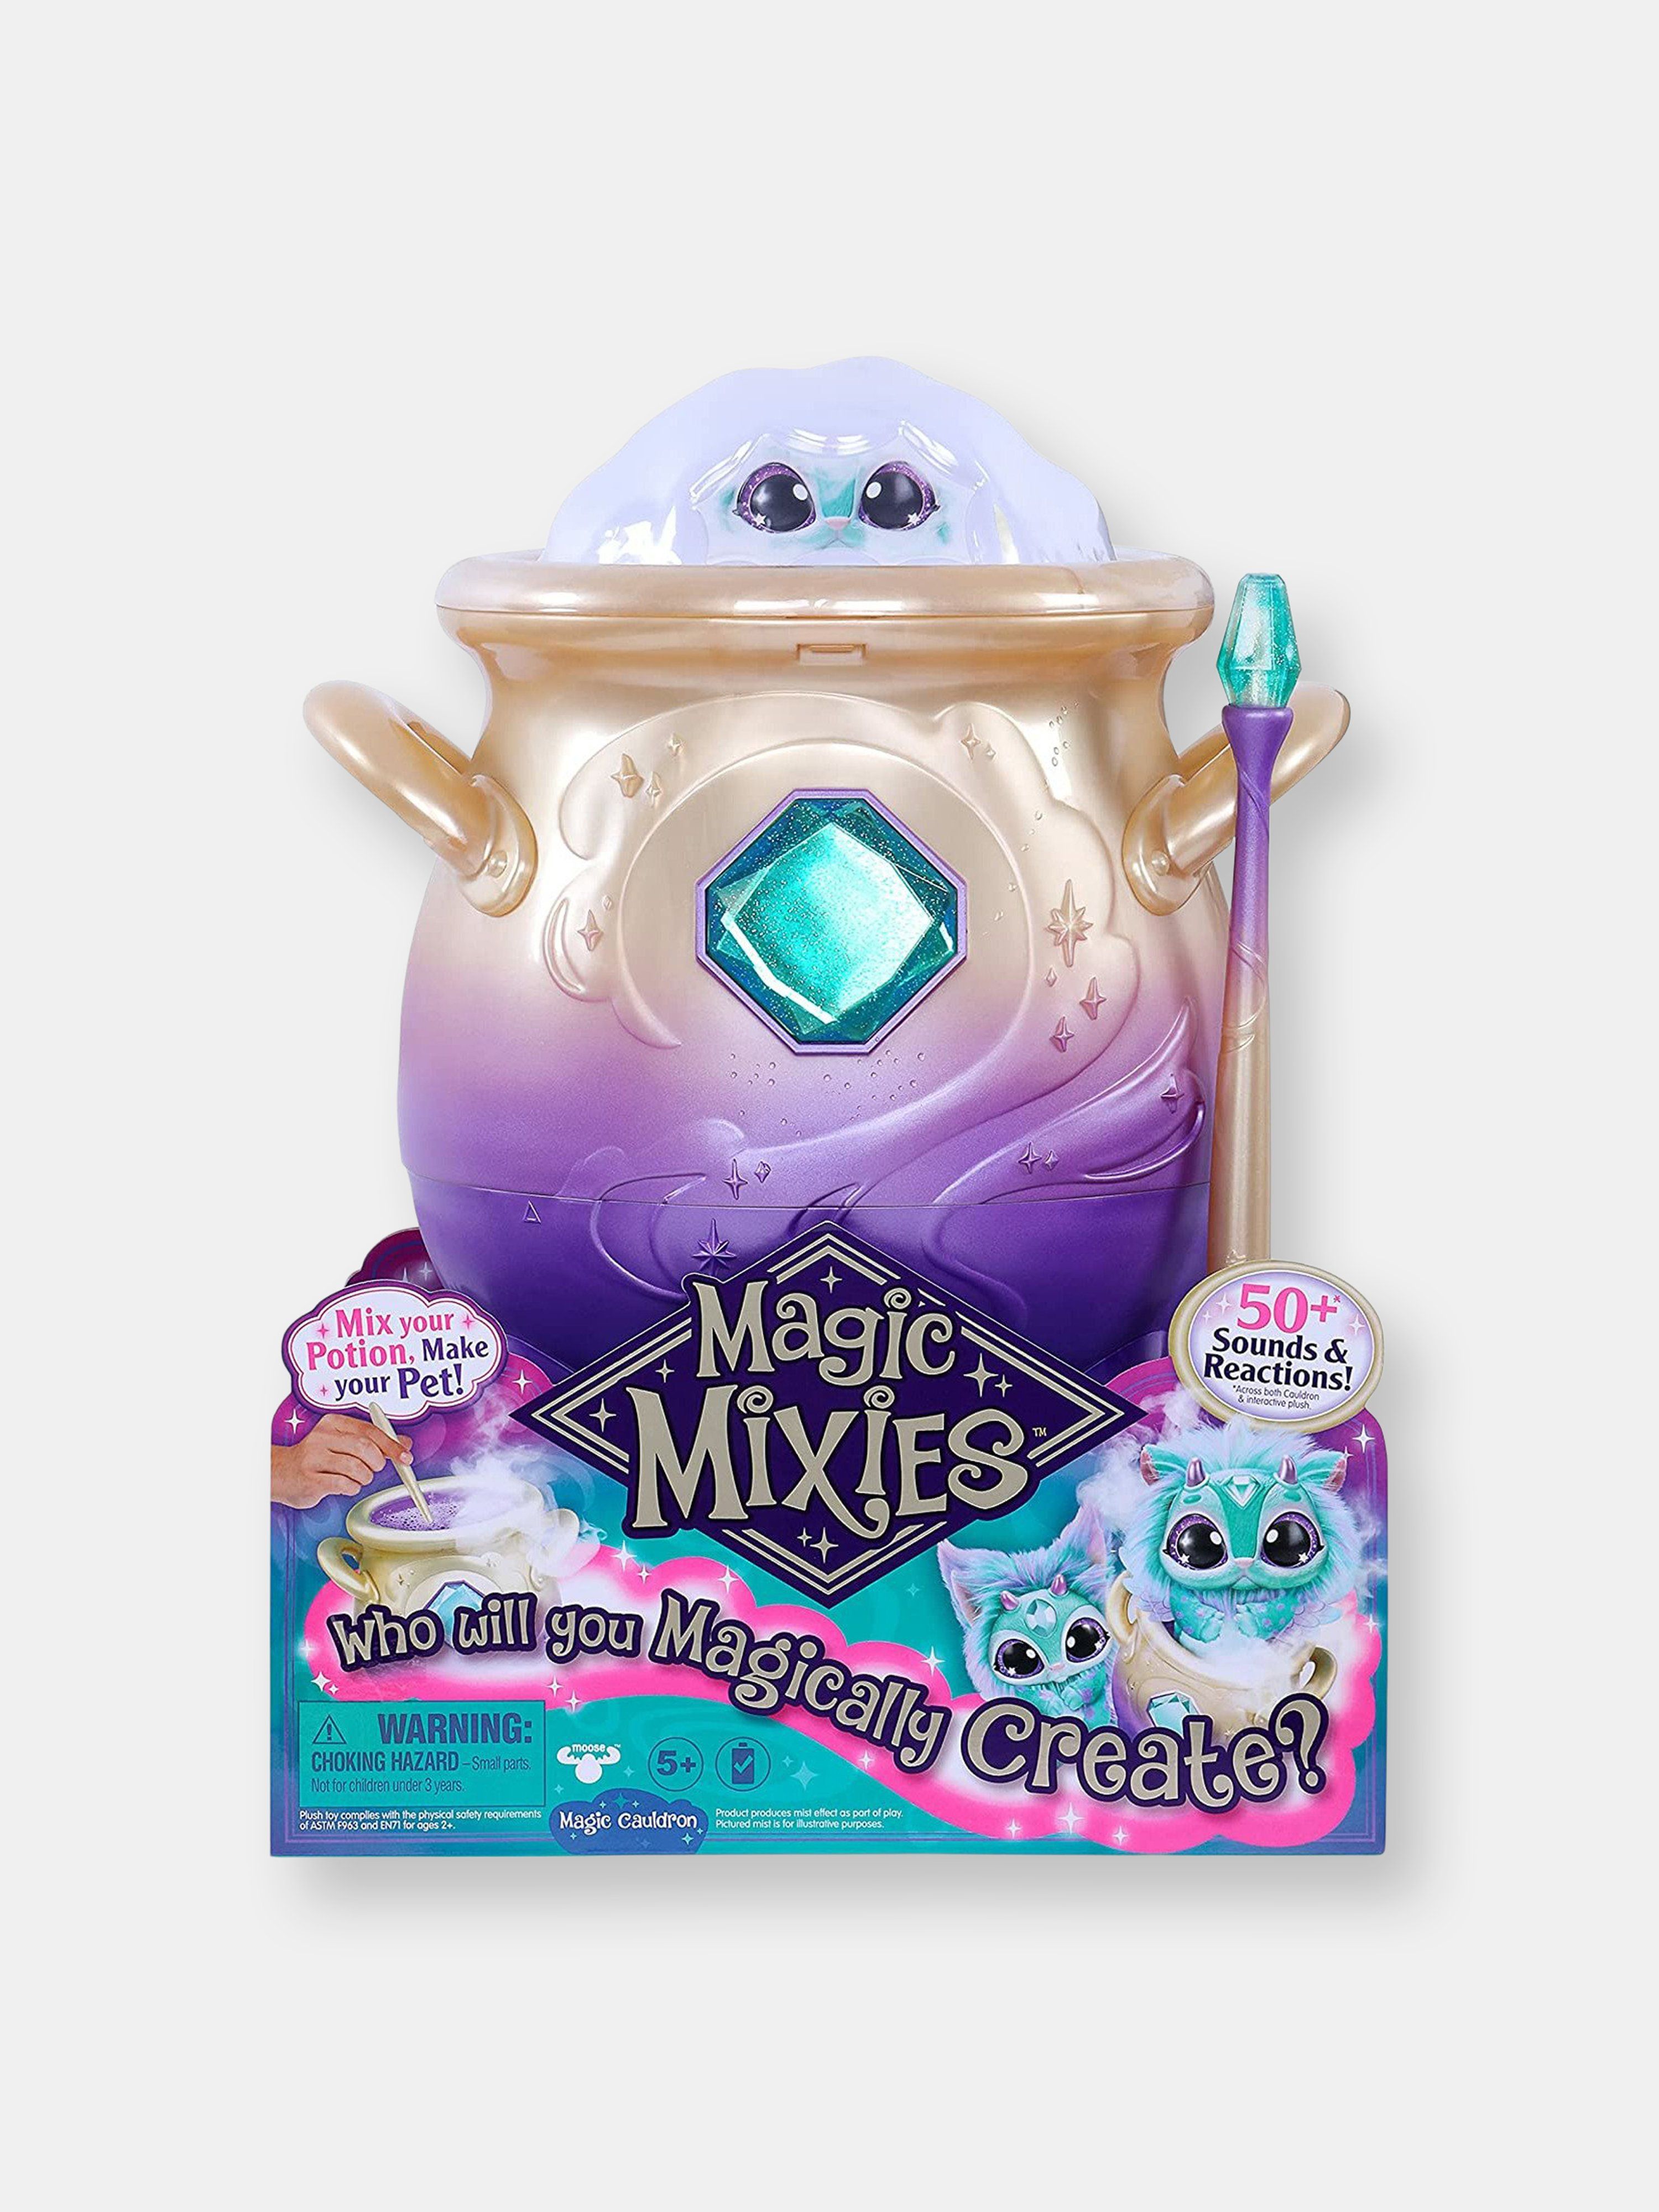 Magic Mixies Magical Misting Cauldron With Interactive 8 Inch Blue Plush Toy And 50+ Sounds And Reac | Verishop